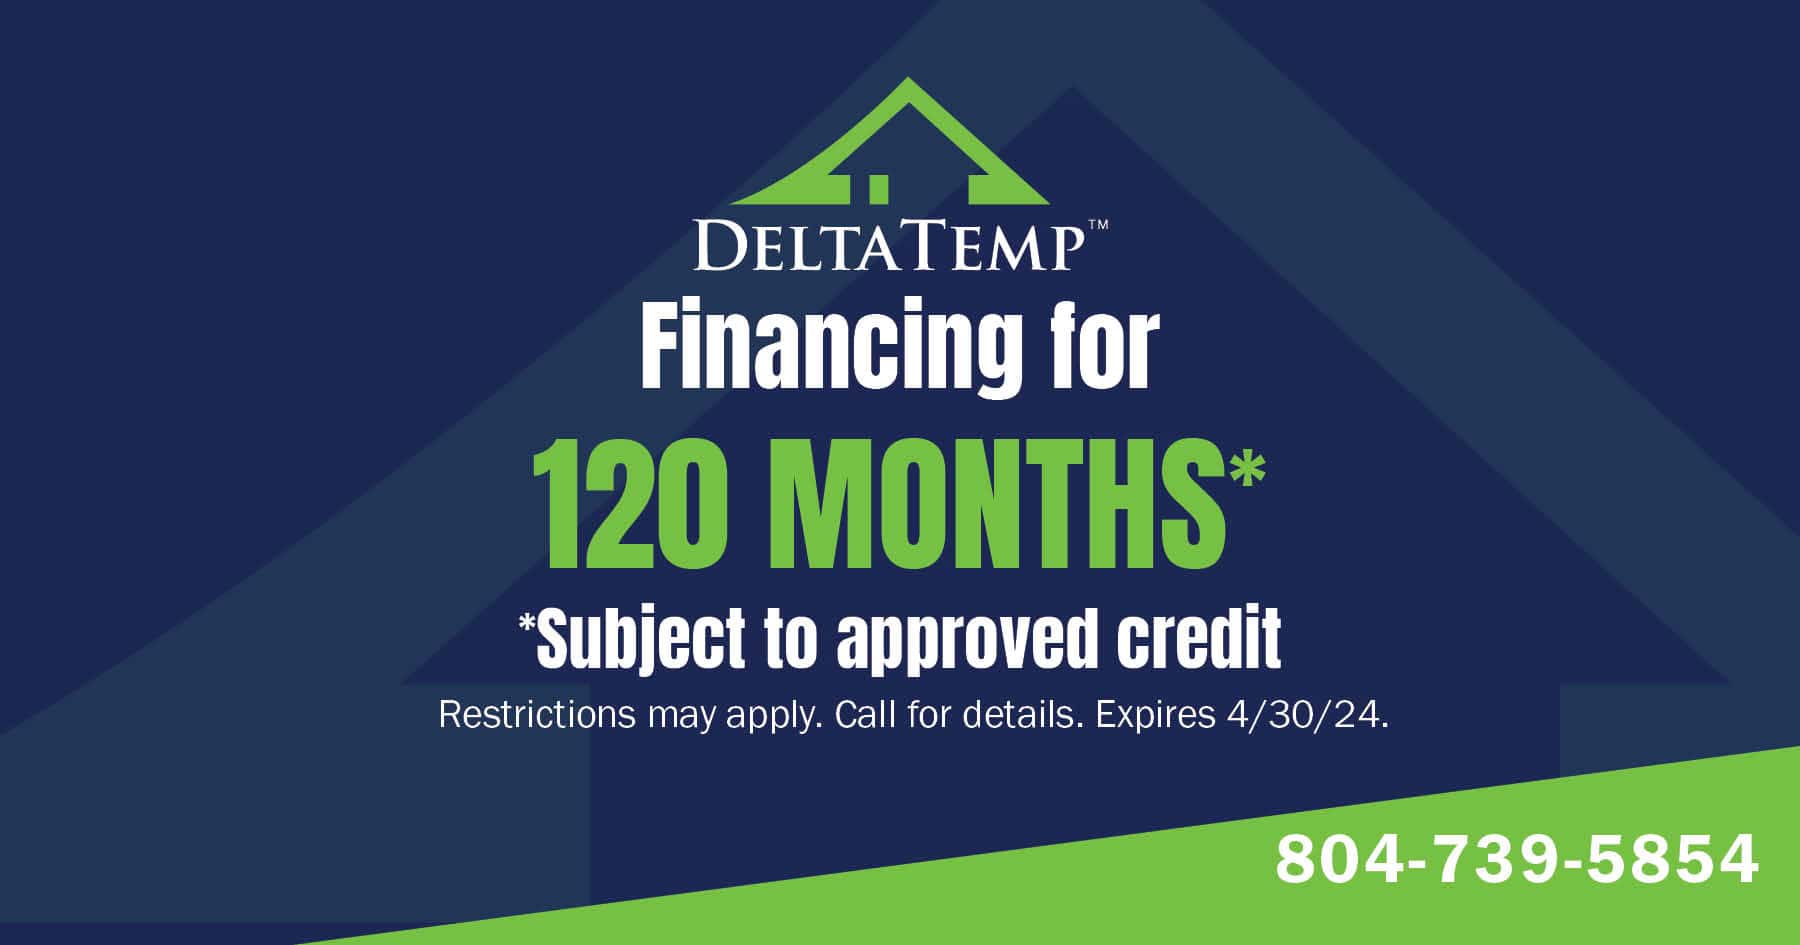 Financing for 120 months. Subject to approved credit. Restrictions may apply. Call for details. Expires 4/30/2024.